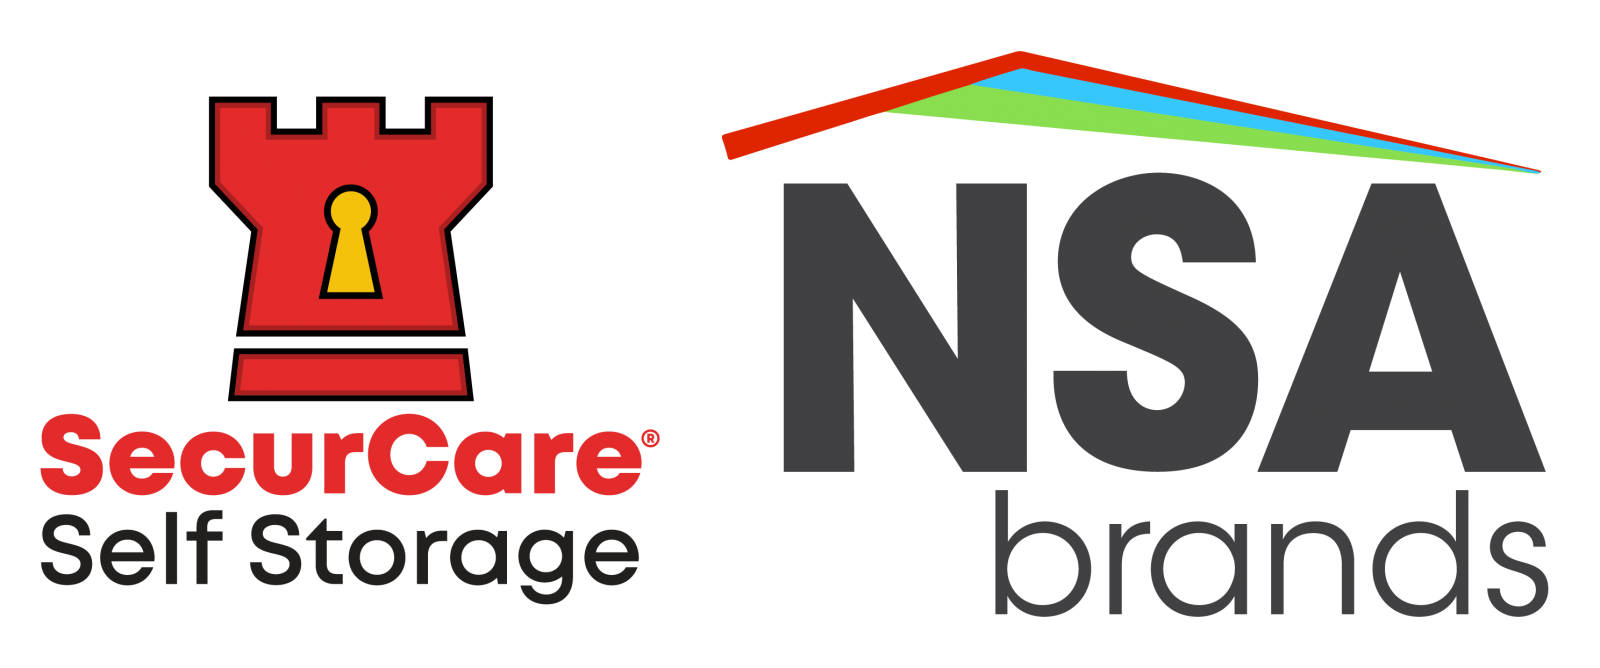 SecurCare is proud to be part of the NSA Brands family. Explore careers today!